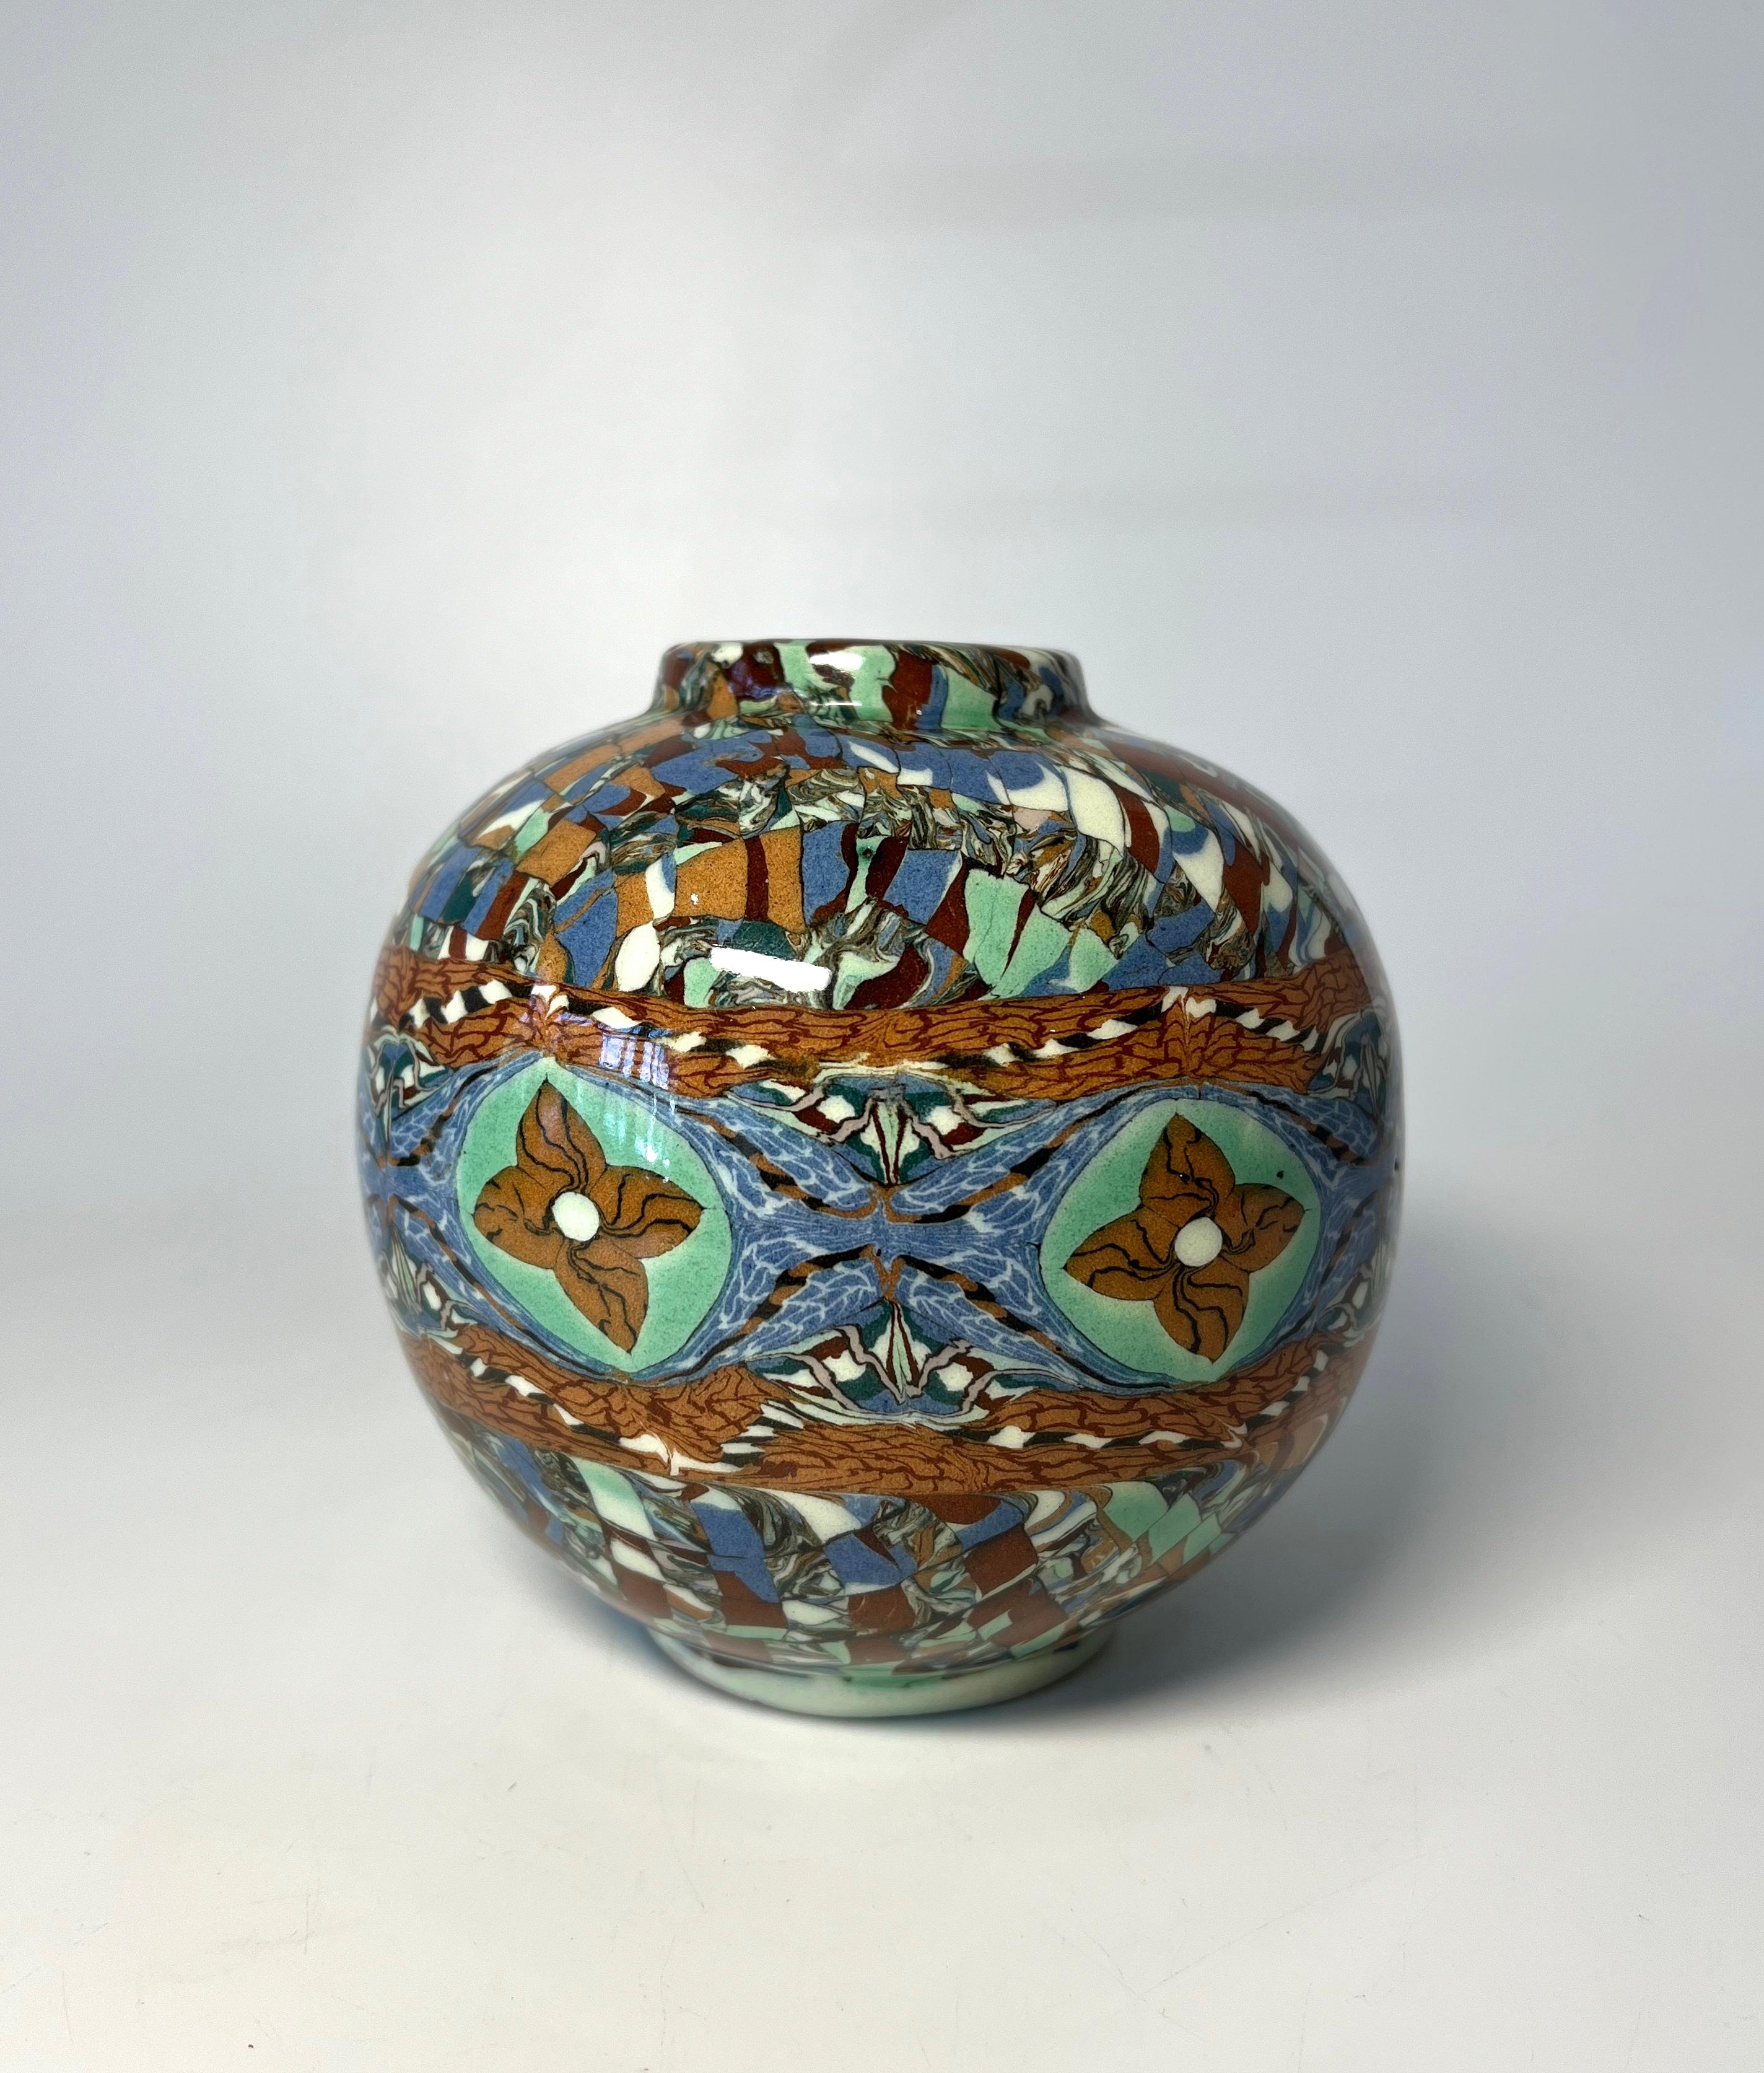 Jean Gerbino for Vallauris, France, ceramic glazed blue, green and terracotta banded mosaic ball vase 
Gerbino uses the Neriage technique to attain such intriguing patterns 
A generously sized piece
Circa 1960's
Signed Gerbino  to base
Height 5